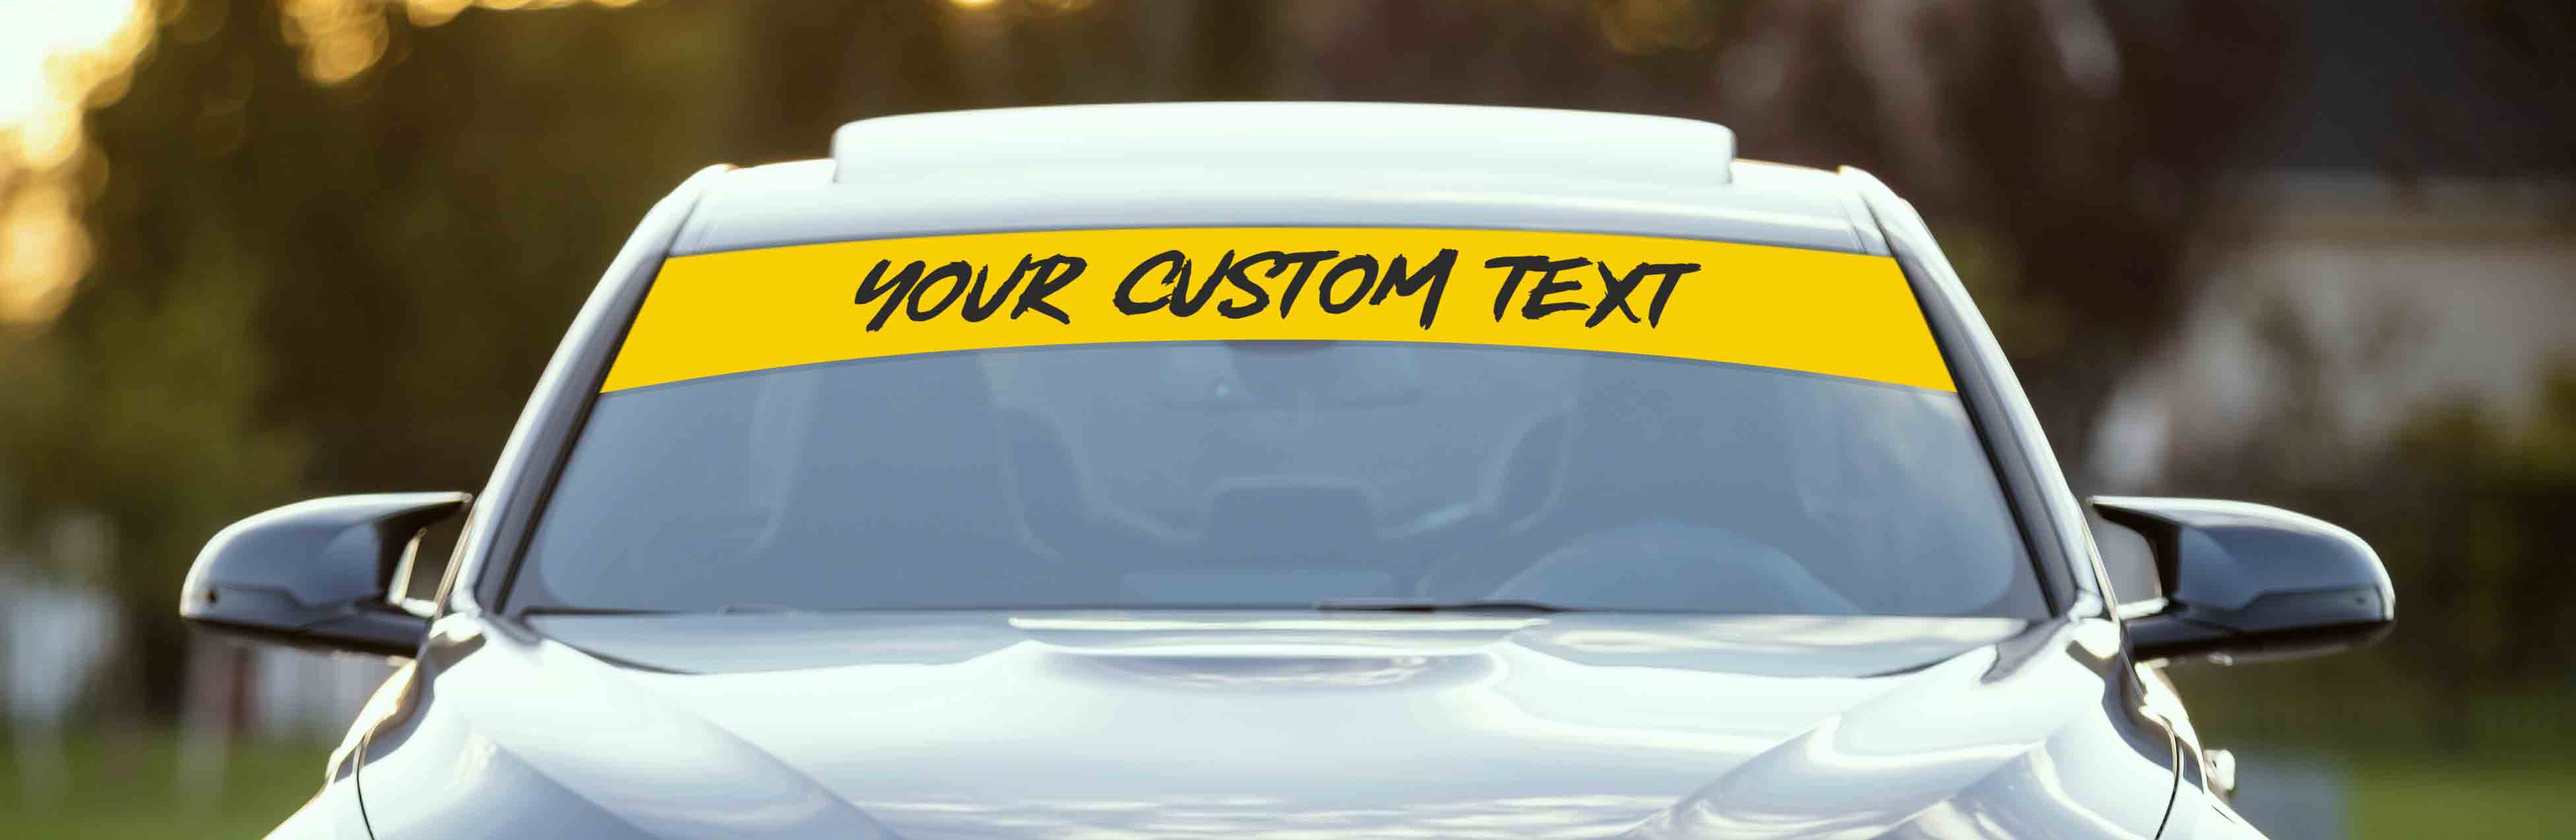 Personalized windshield sun strips with custom text